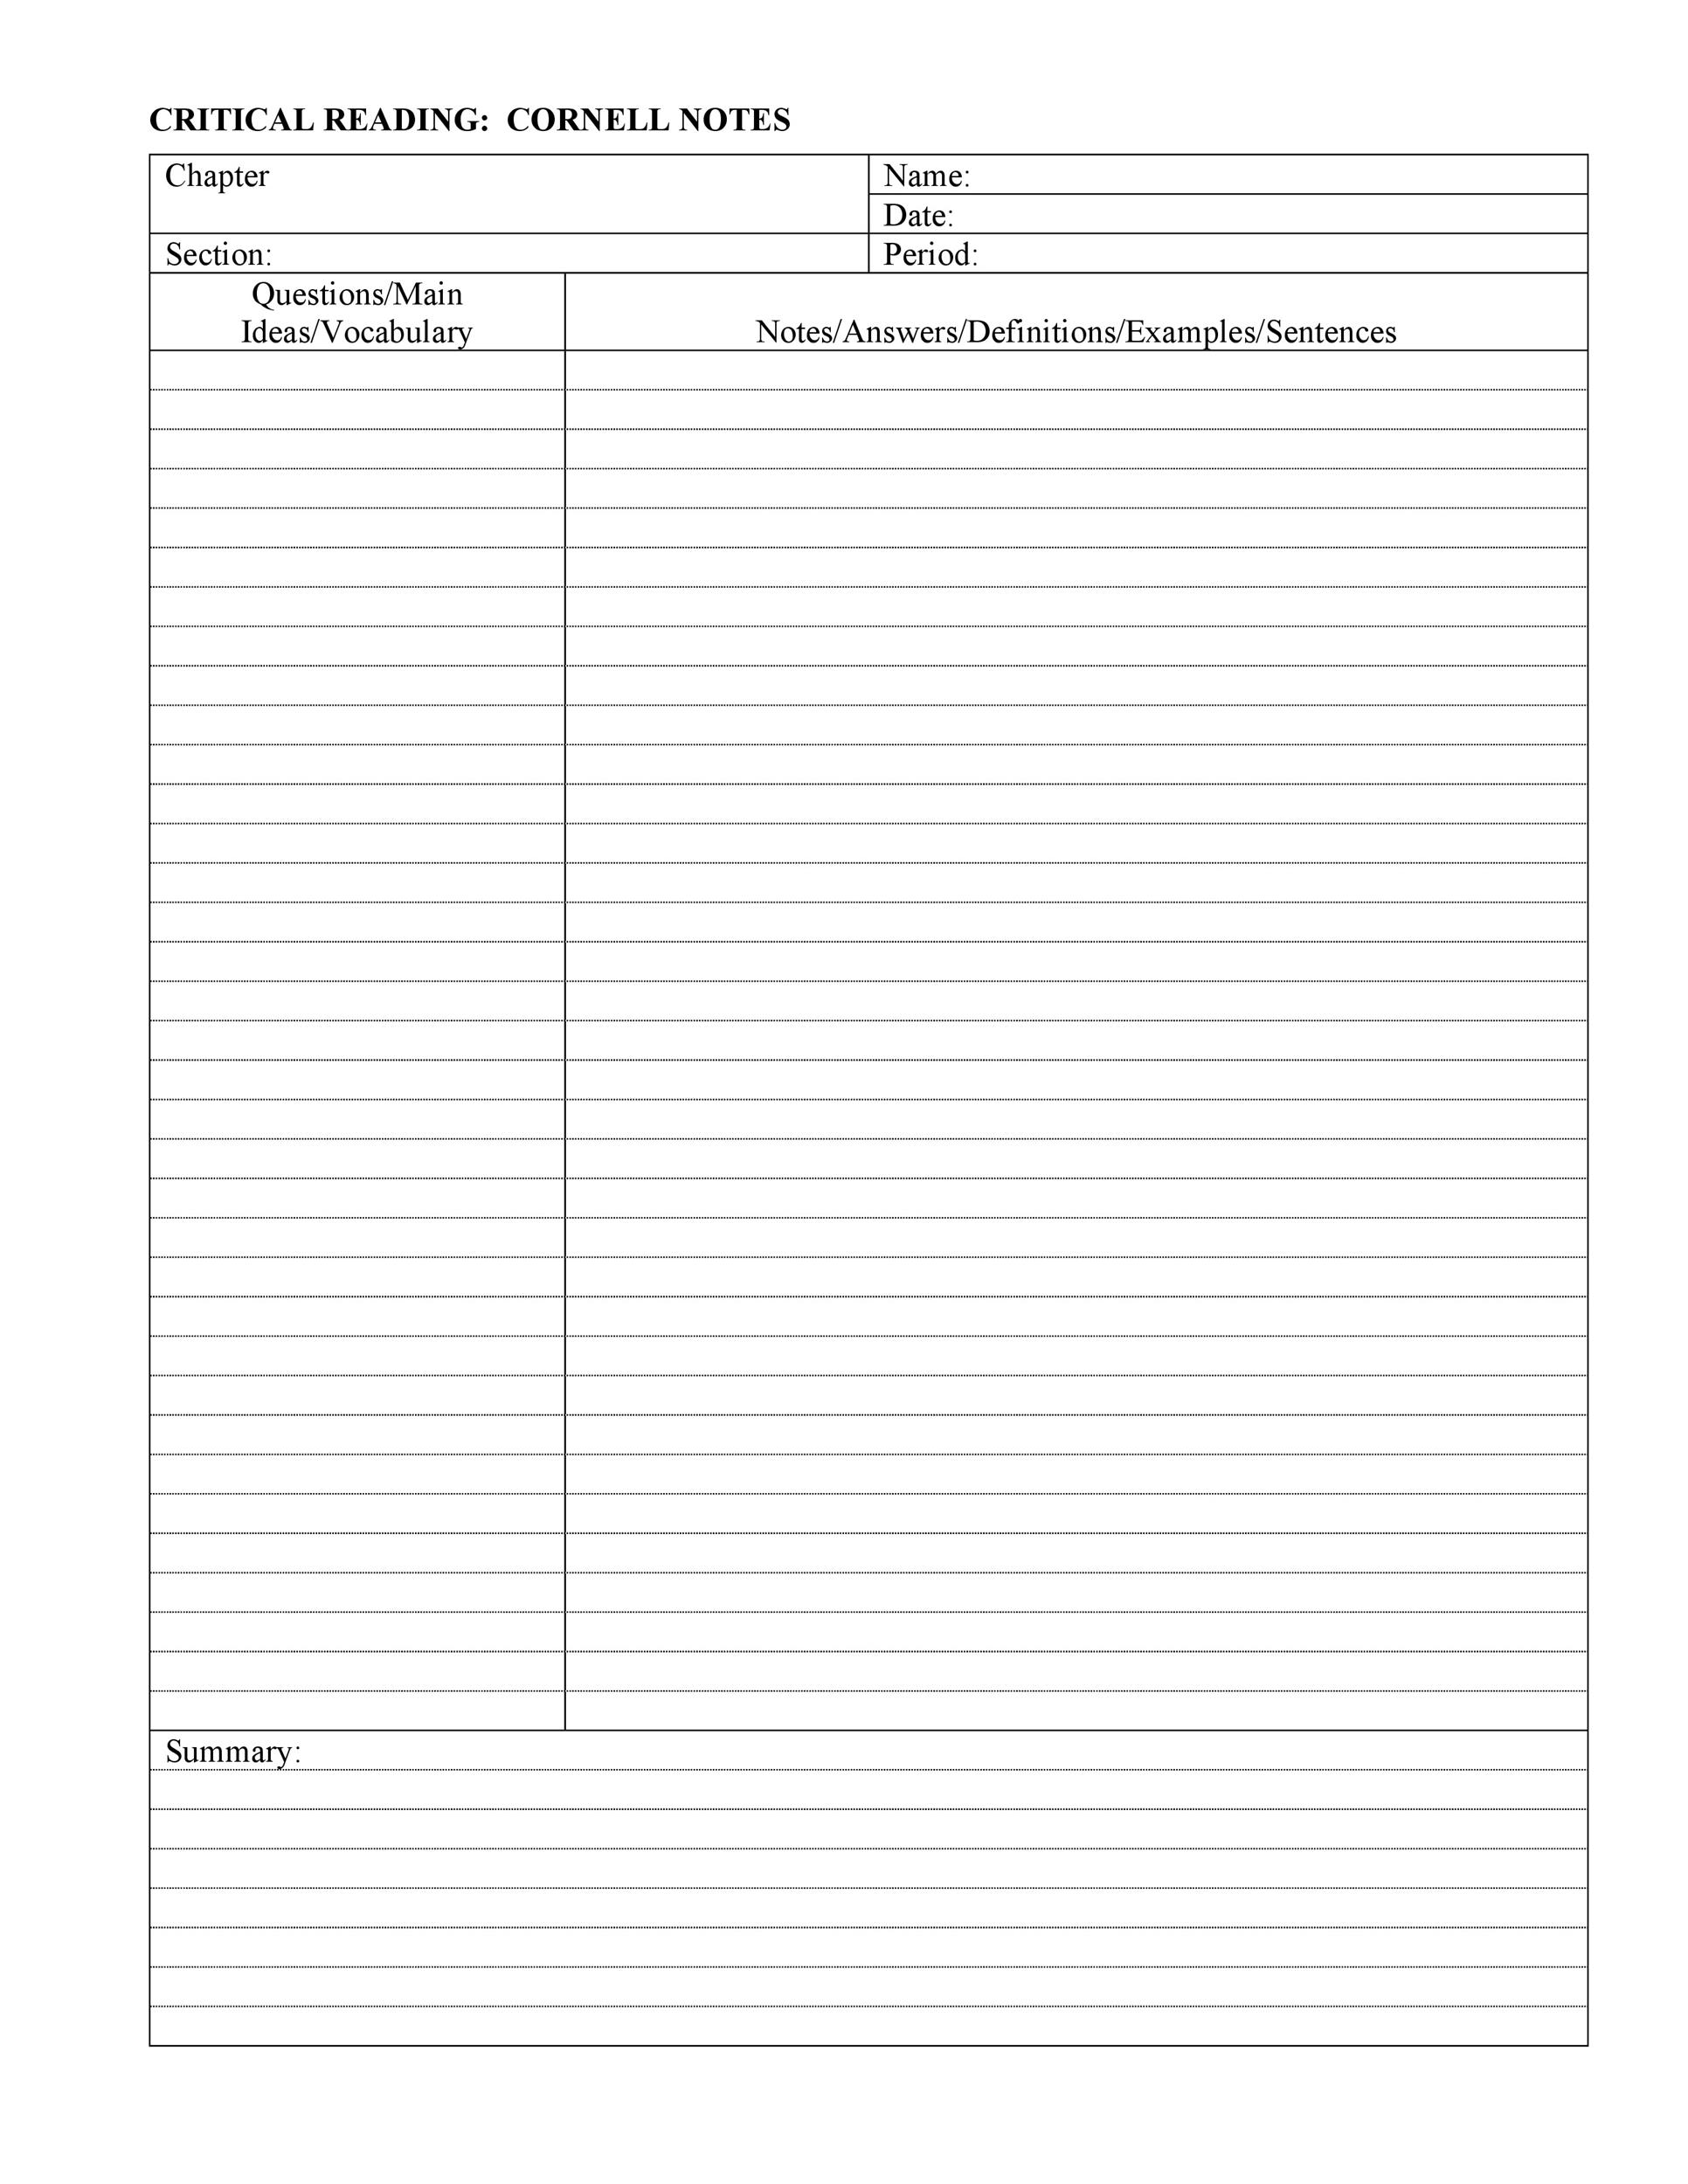 Guided Reading Notes Template from templatelab.com